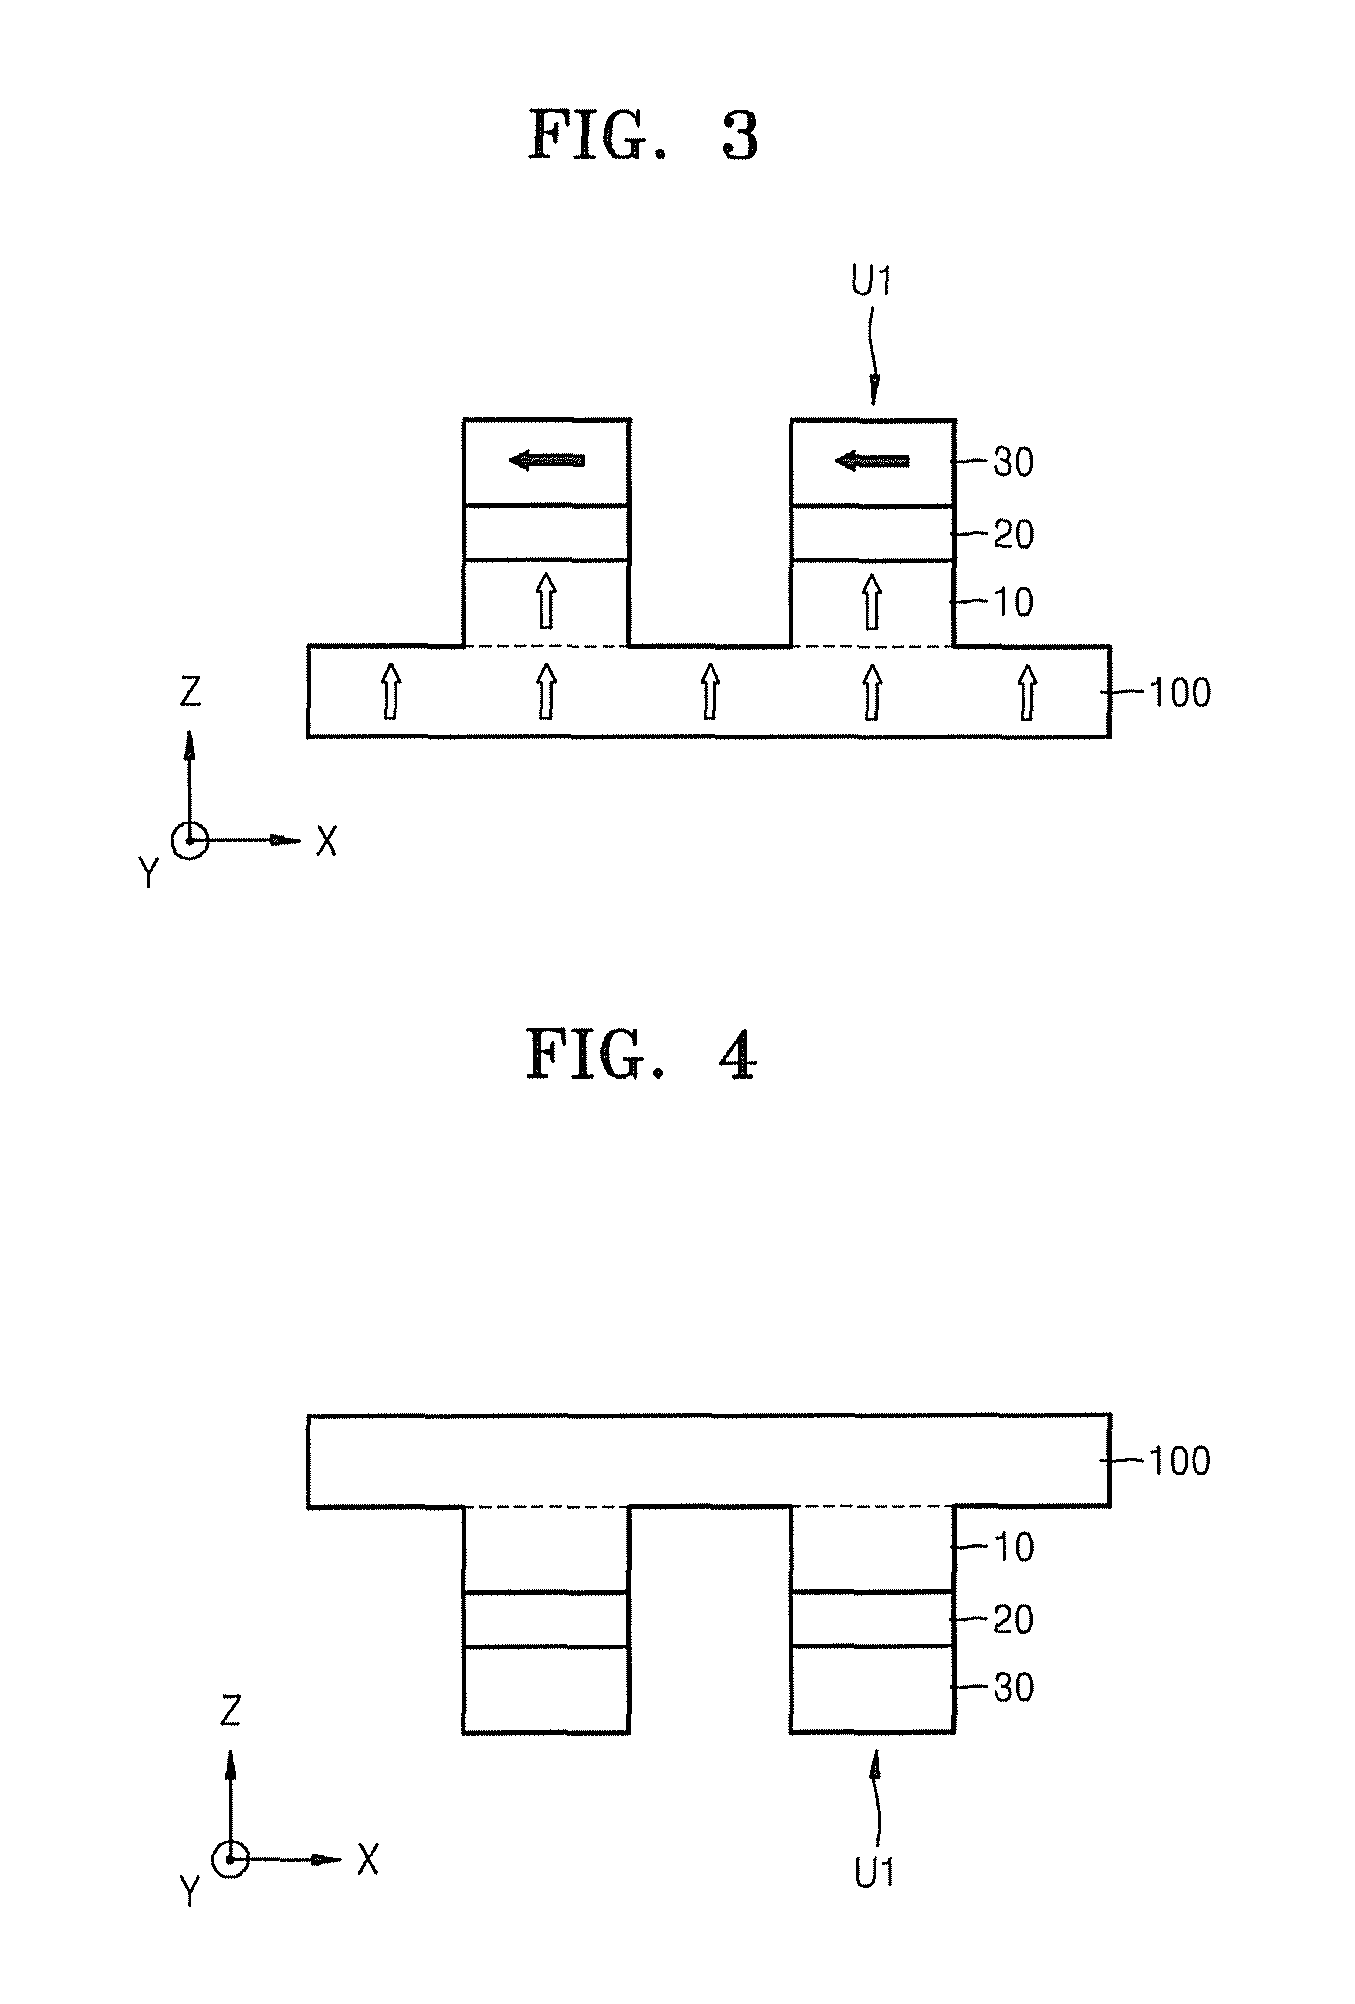 Oscillators and methods of manufacturing and operating the same